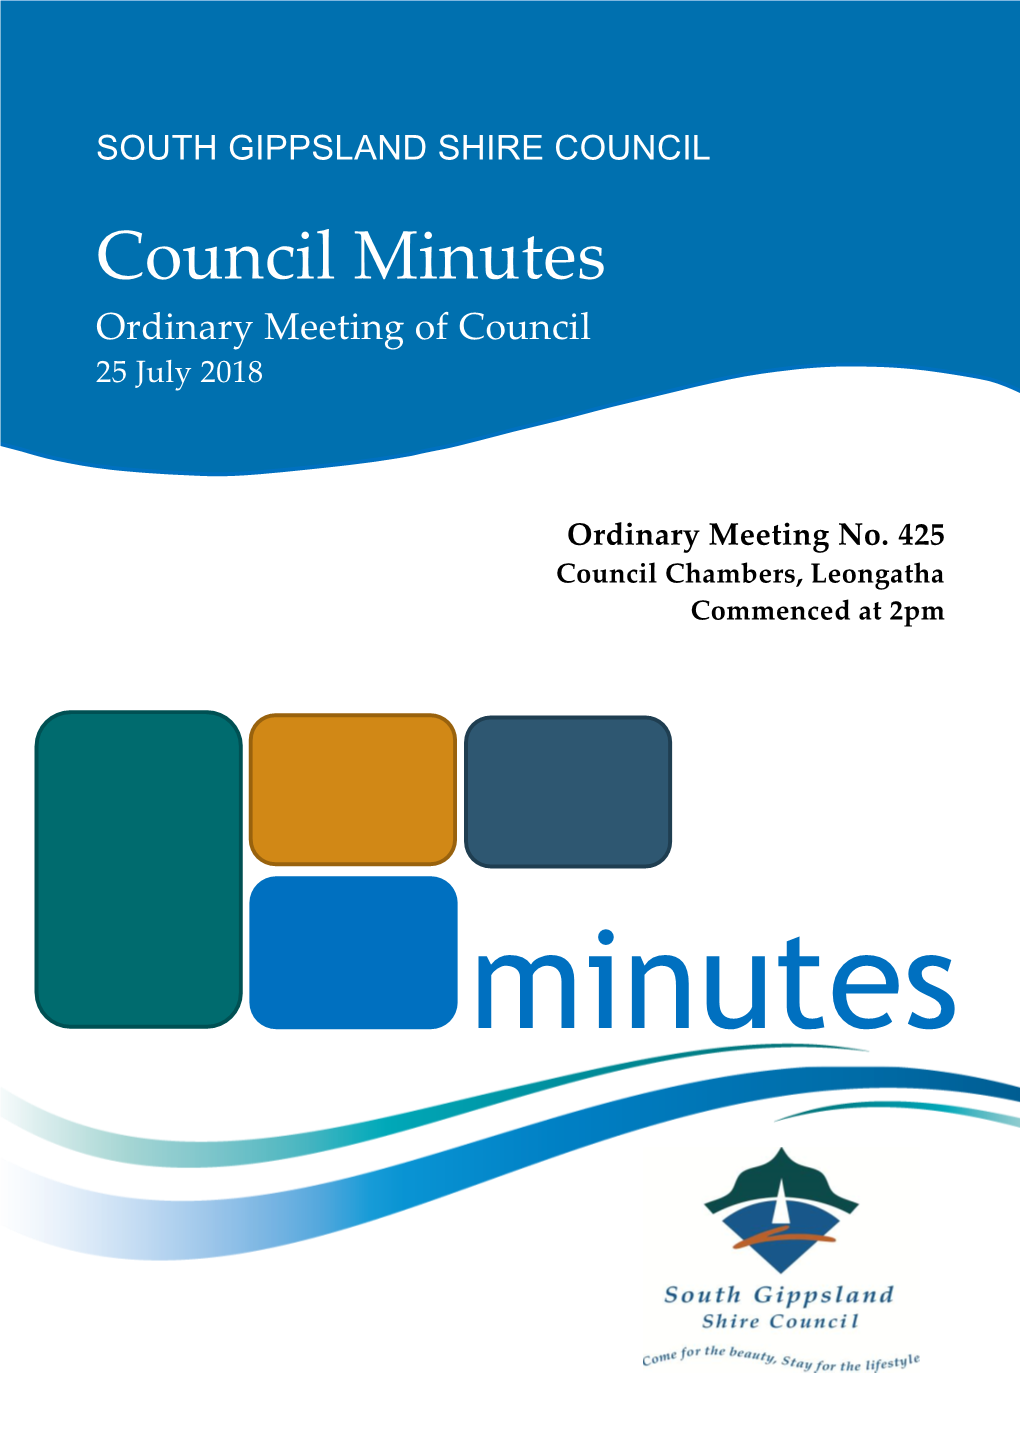 Council Minutes Ordinary Meeting of Council 25 July 2018